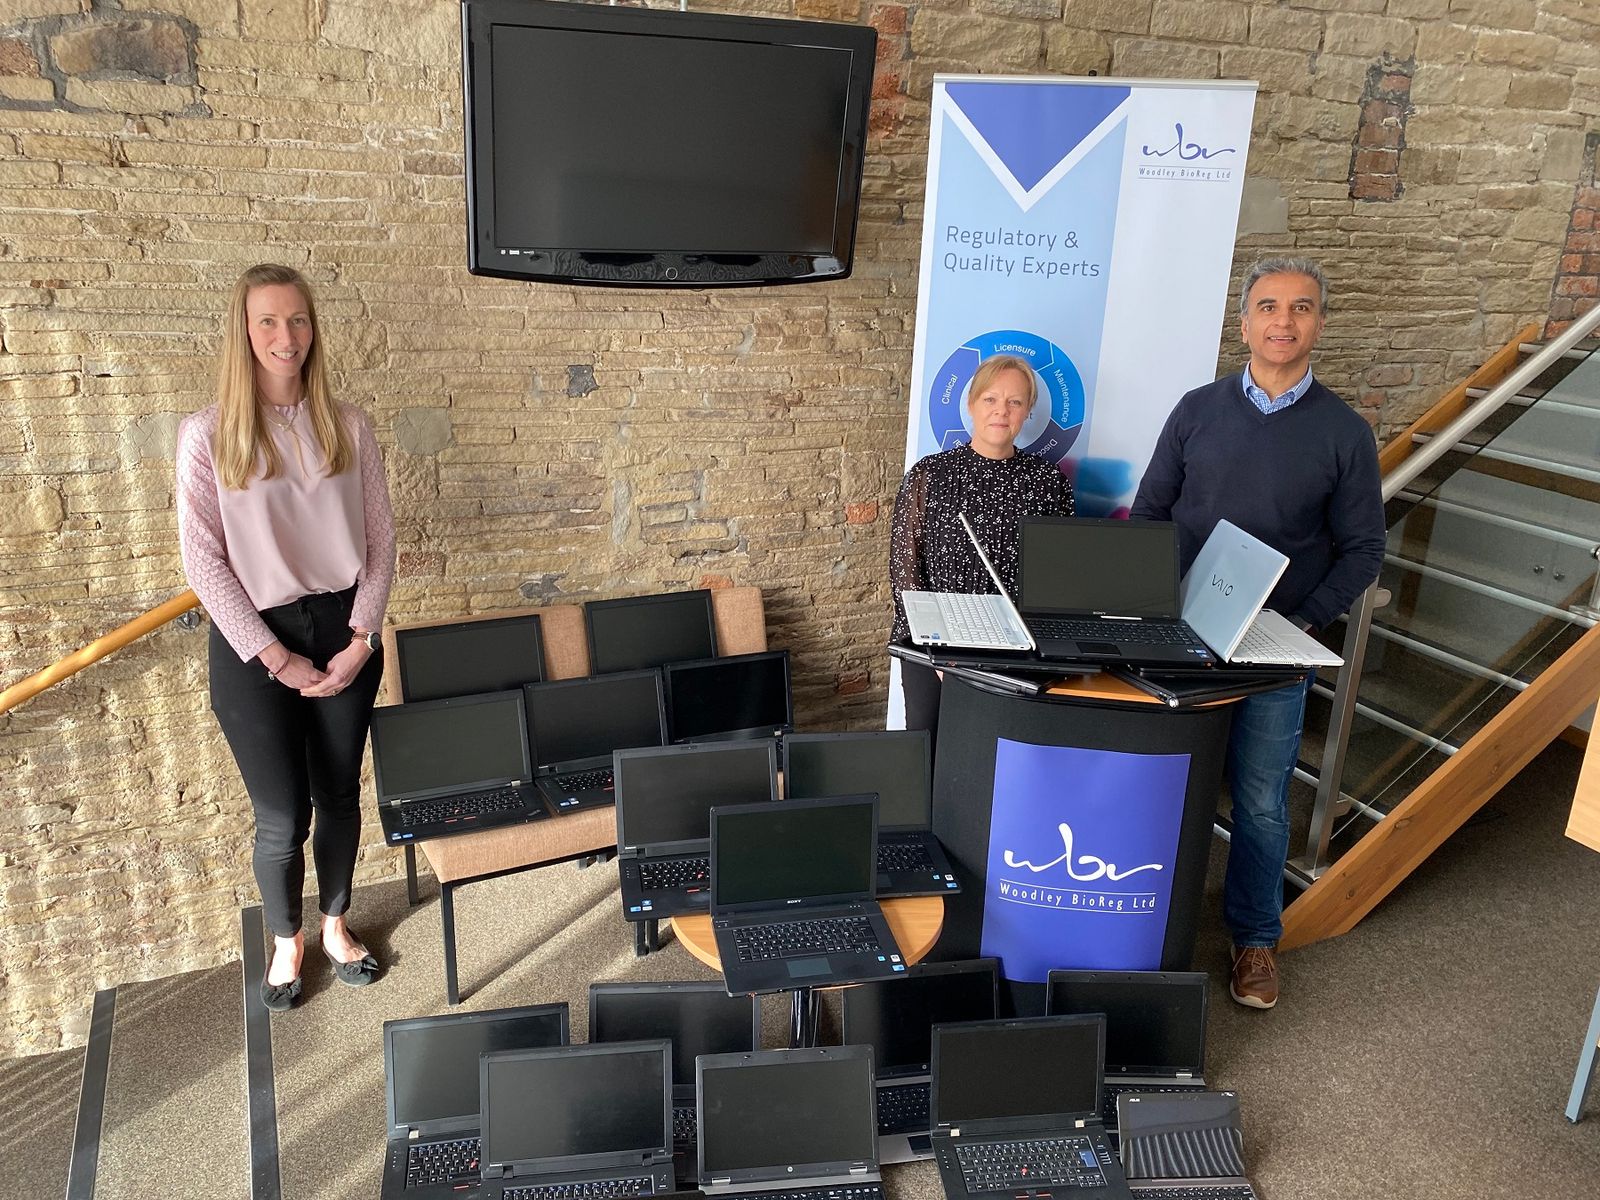 Yorkshire regulatory affairs consultancy donates 24 laptops to pupils in need